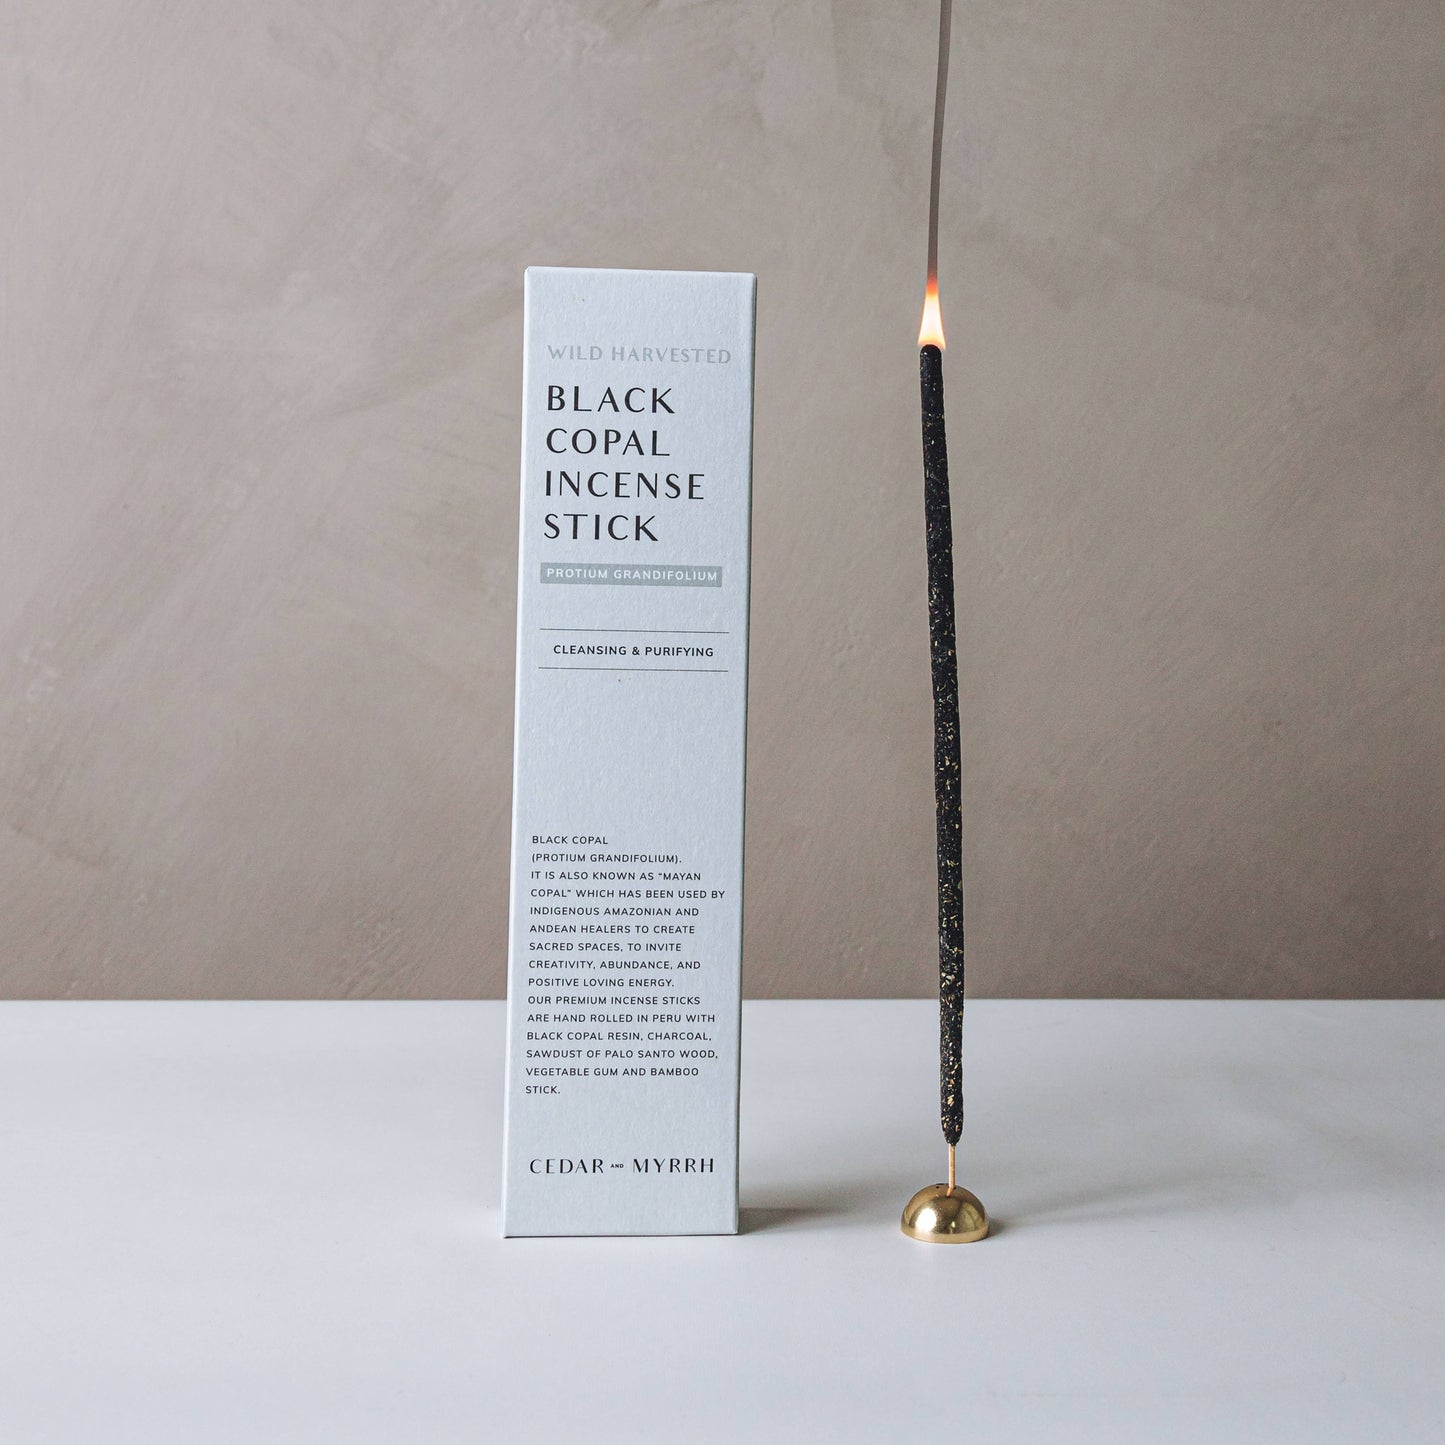 [Burning Ritual] Black Copal Incense Stick - The Crowd Went Wild